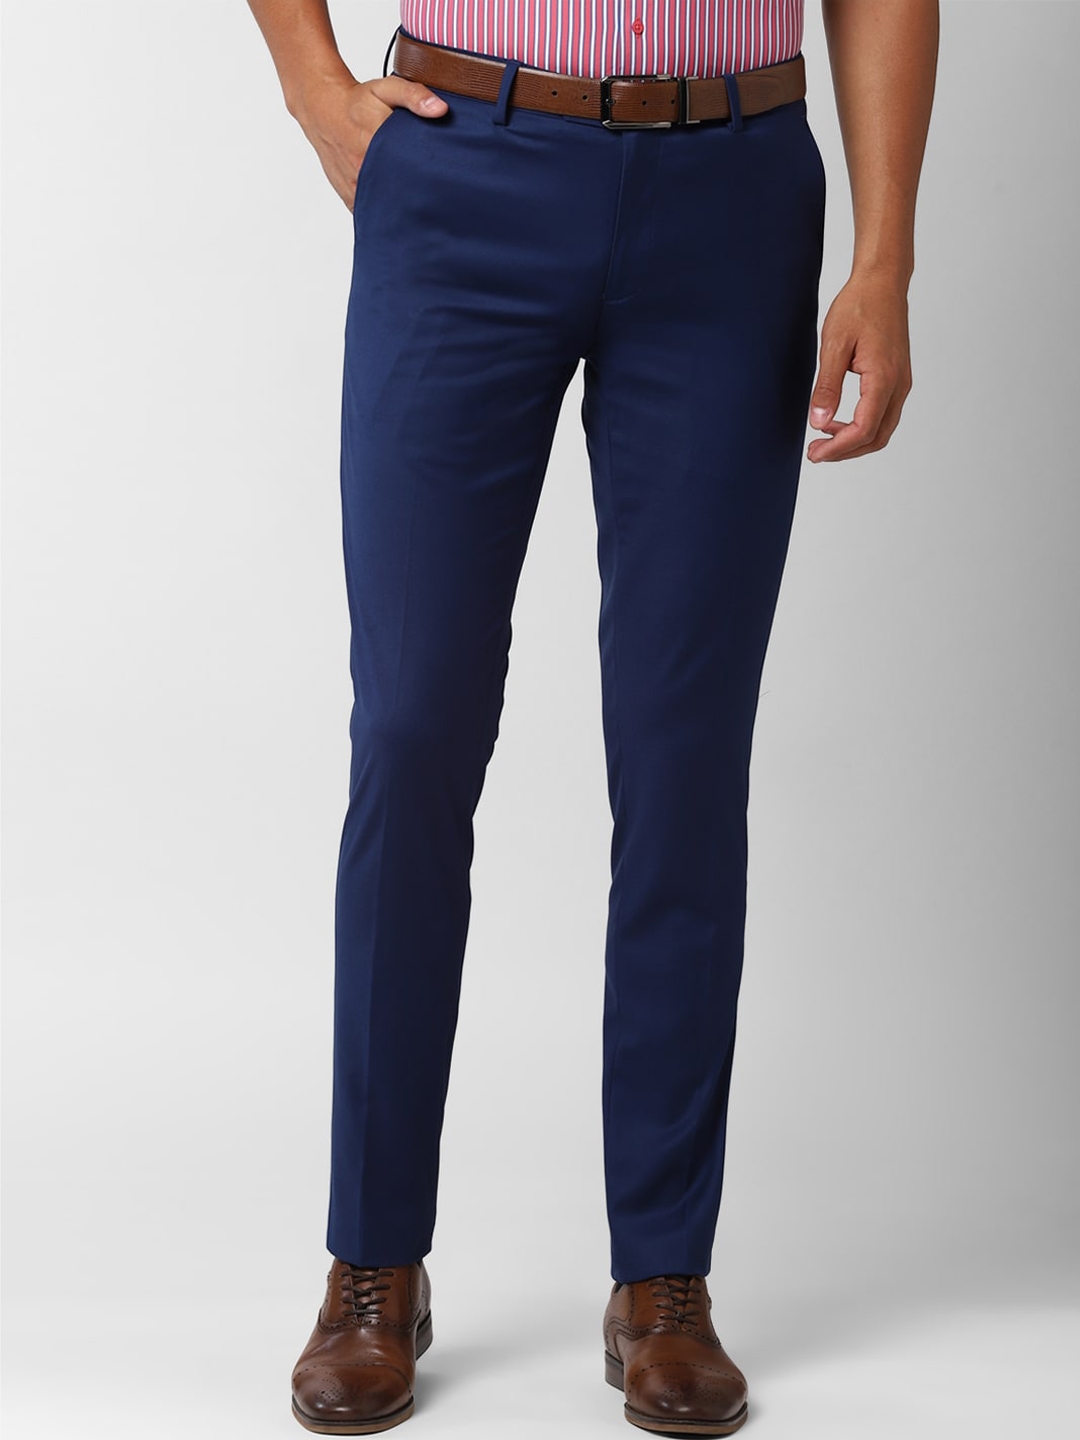 Buy Mast & Harbour Women Navy Blue Checked Formal Trousers - Trousers for  Women 1454594 | Myntra